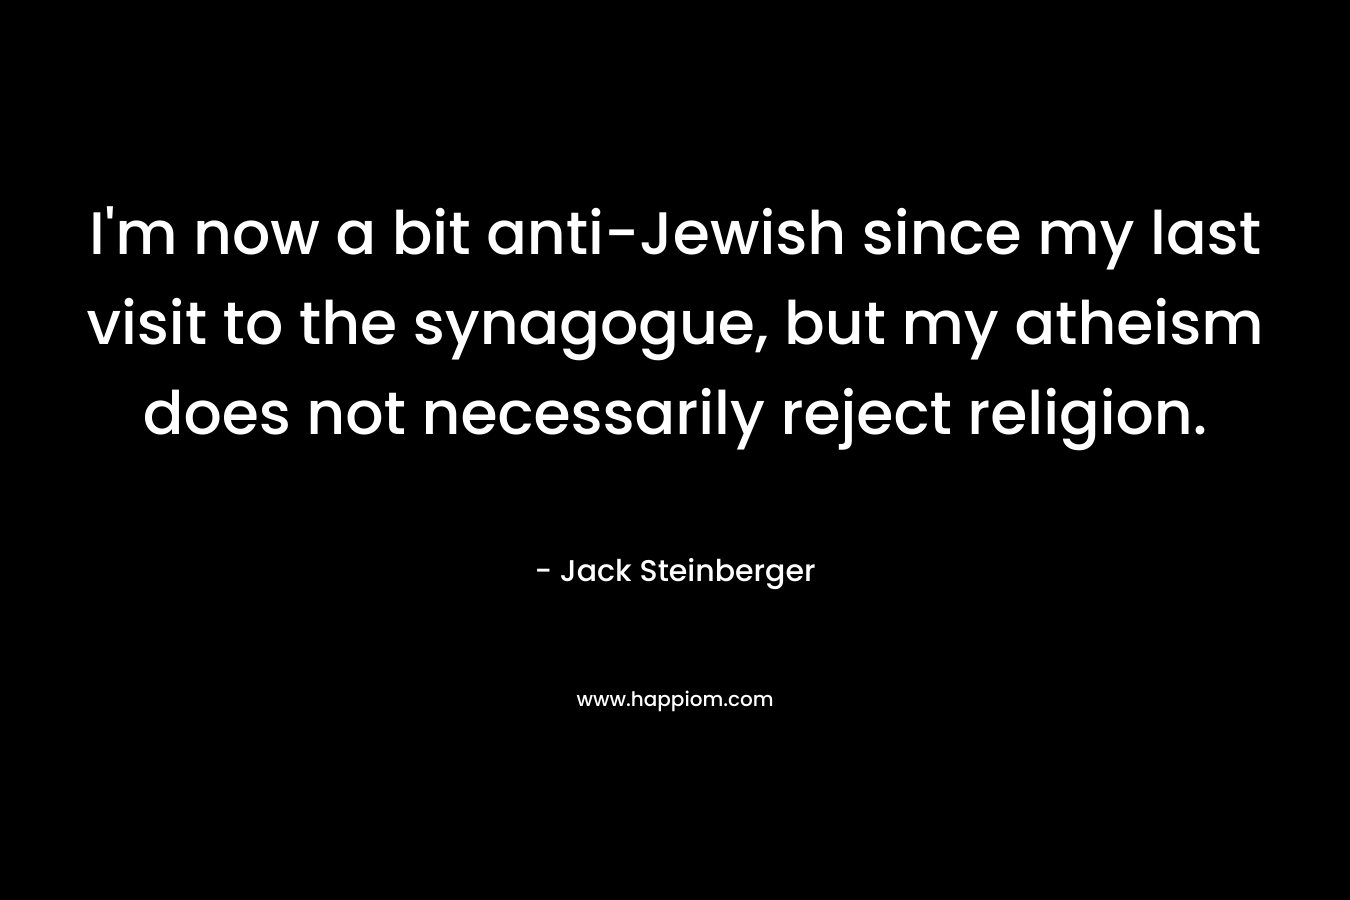 I’m now a bit anti-Jewish since my last visit to the synagogue, but my atheism does not necessarily reject religion. – Jack Steinberger